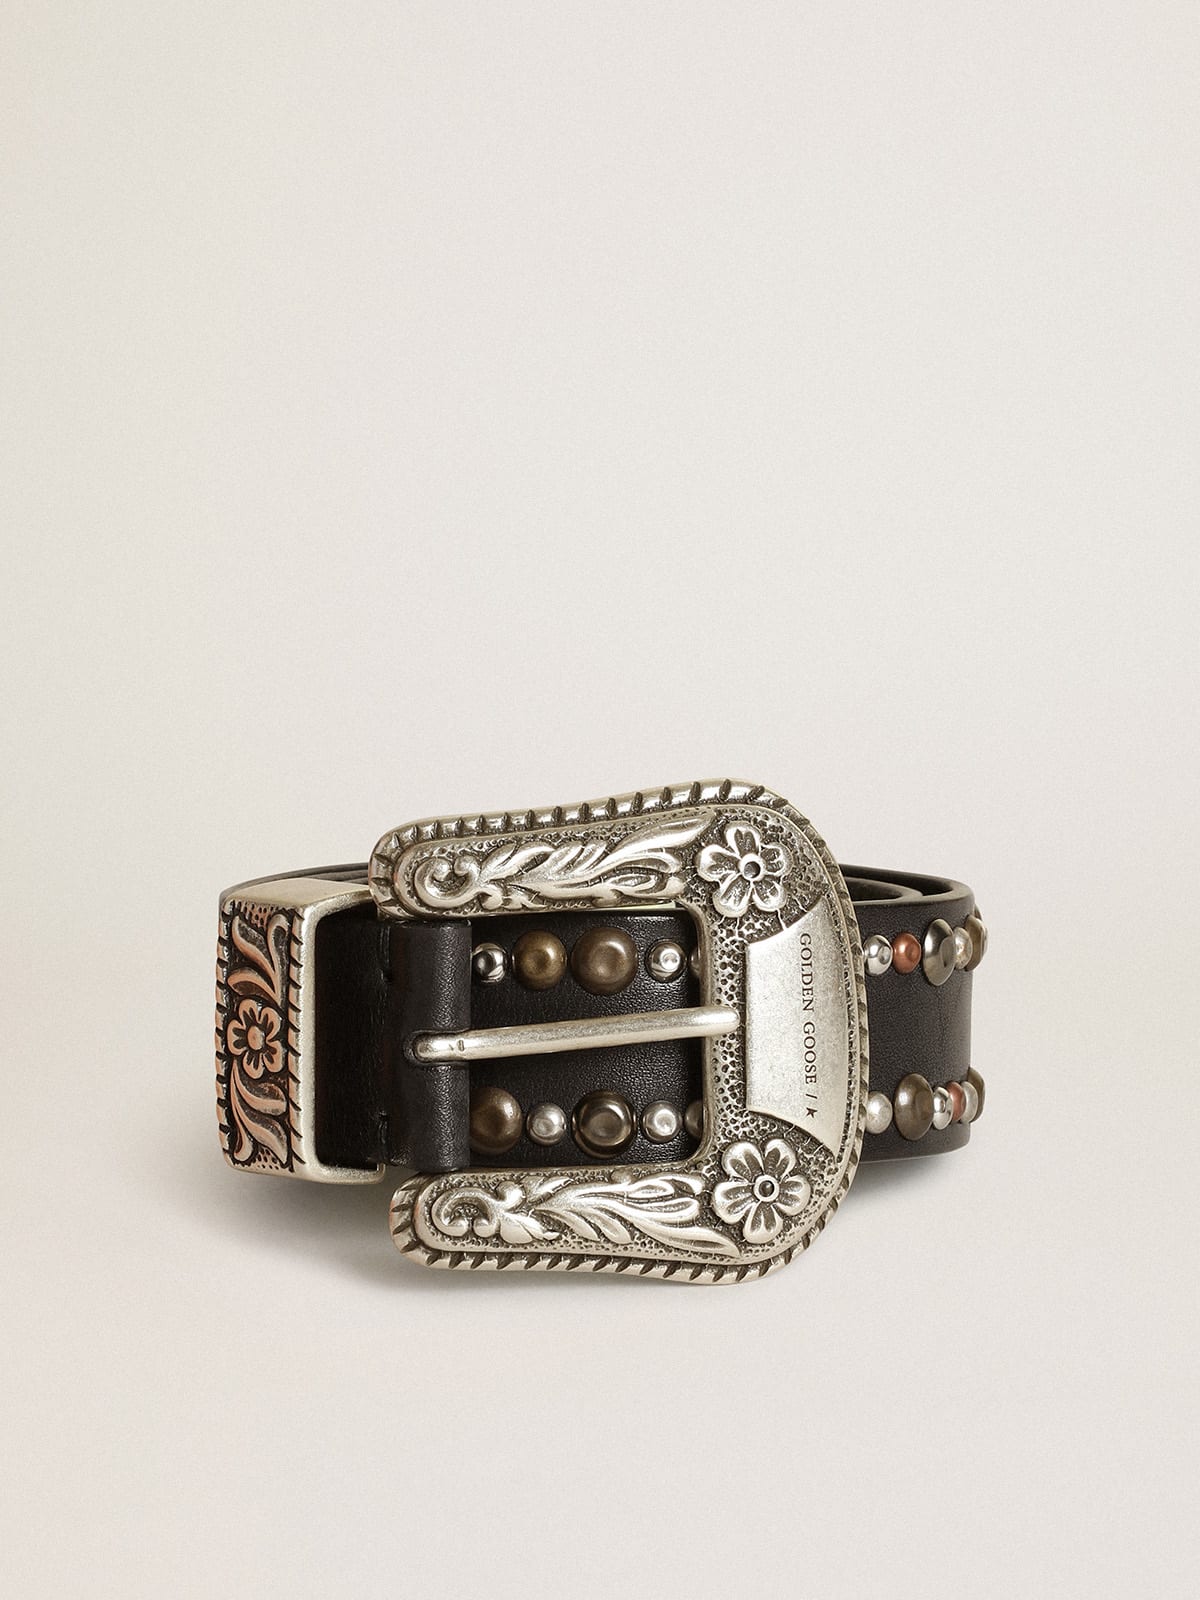 Golden Goose - Women's belt in black leather with studs in 